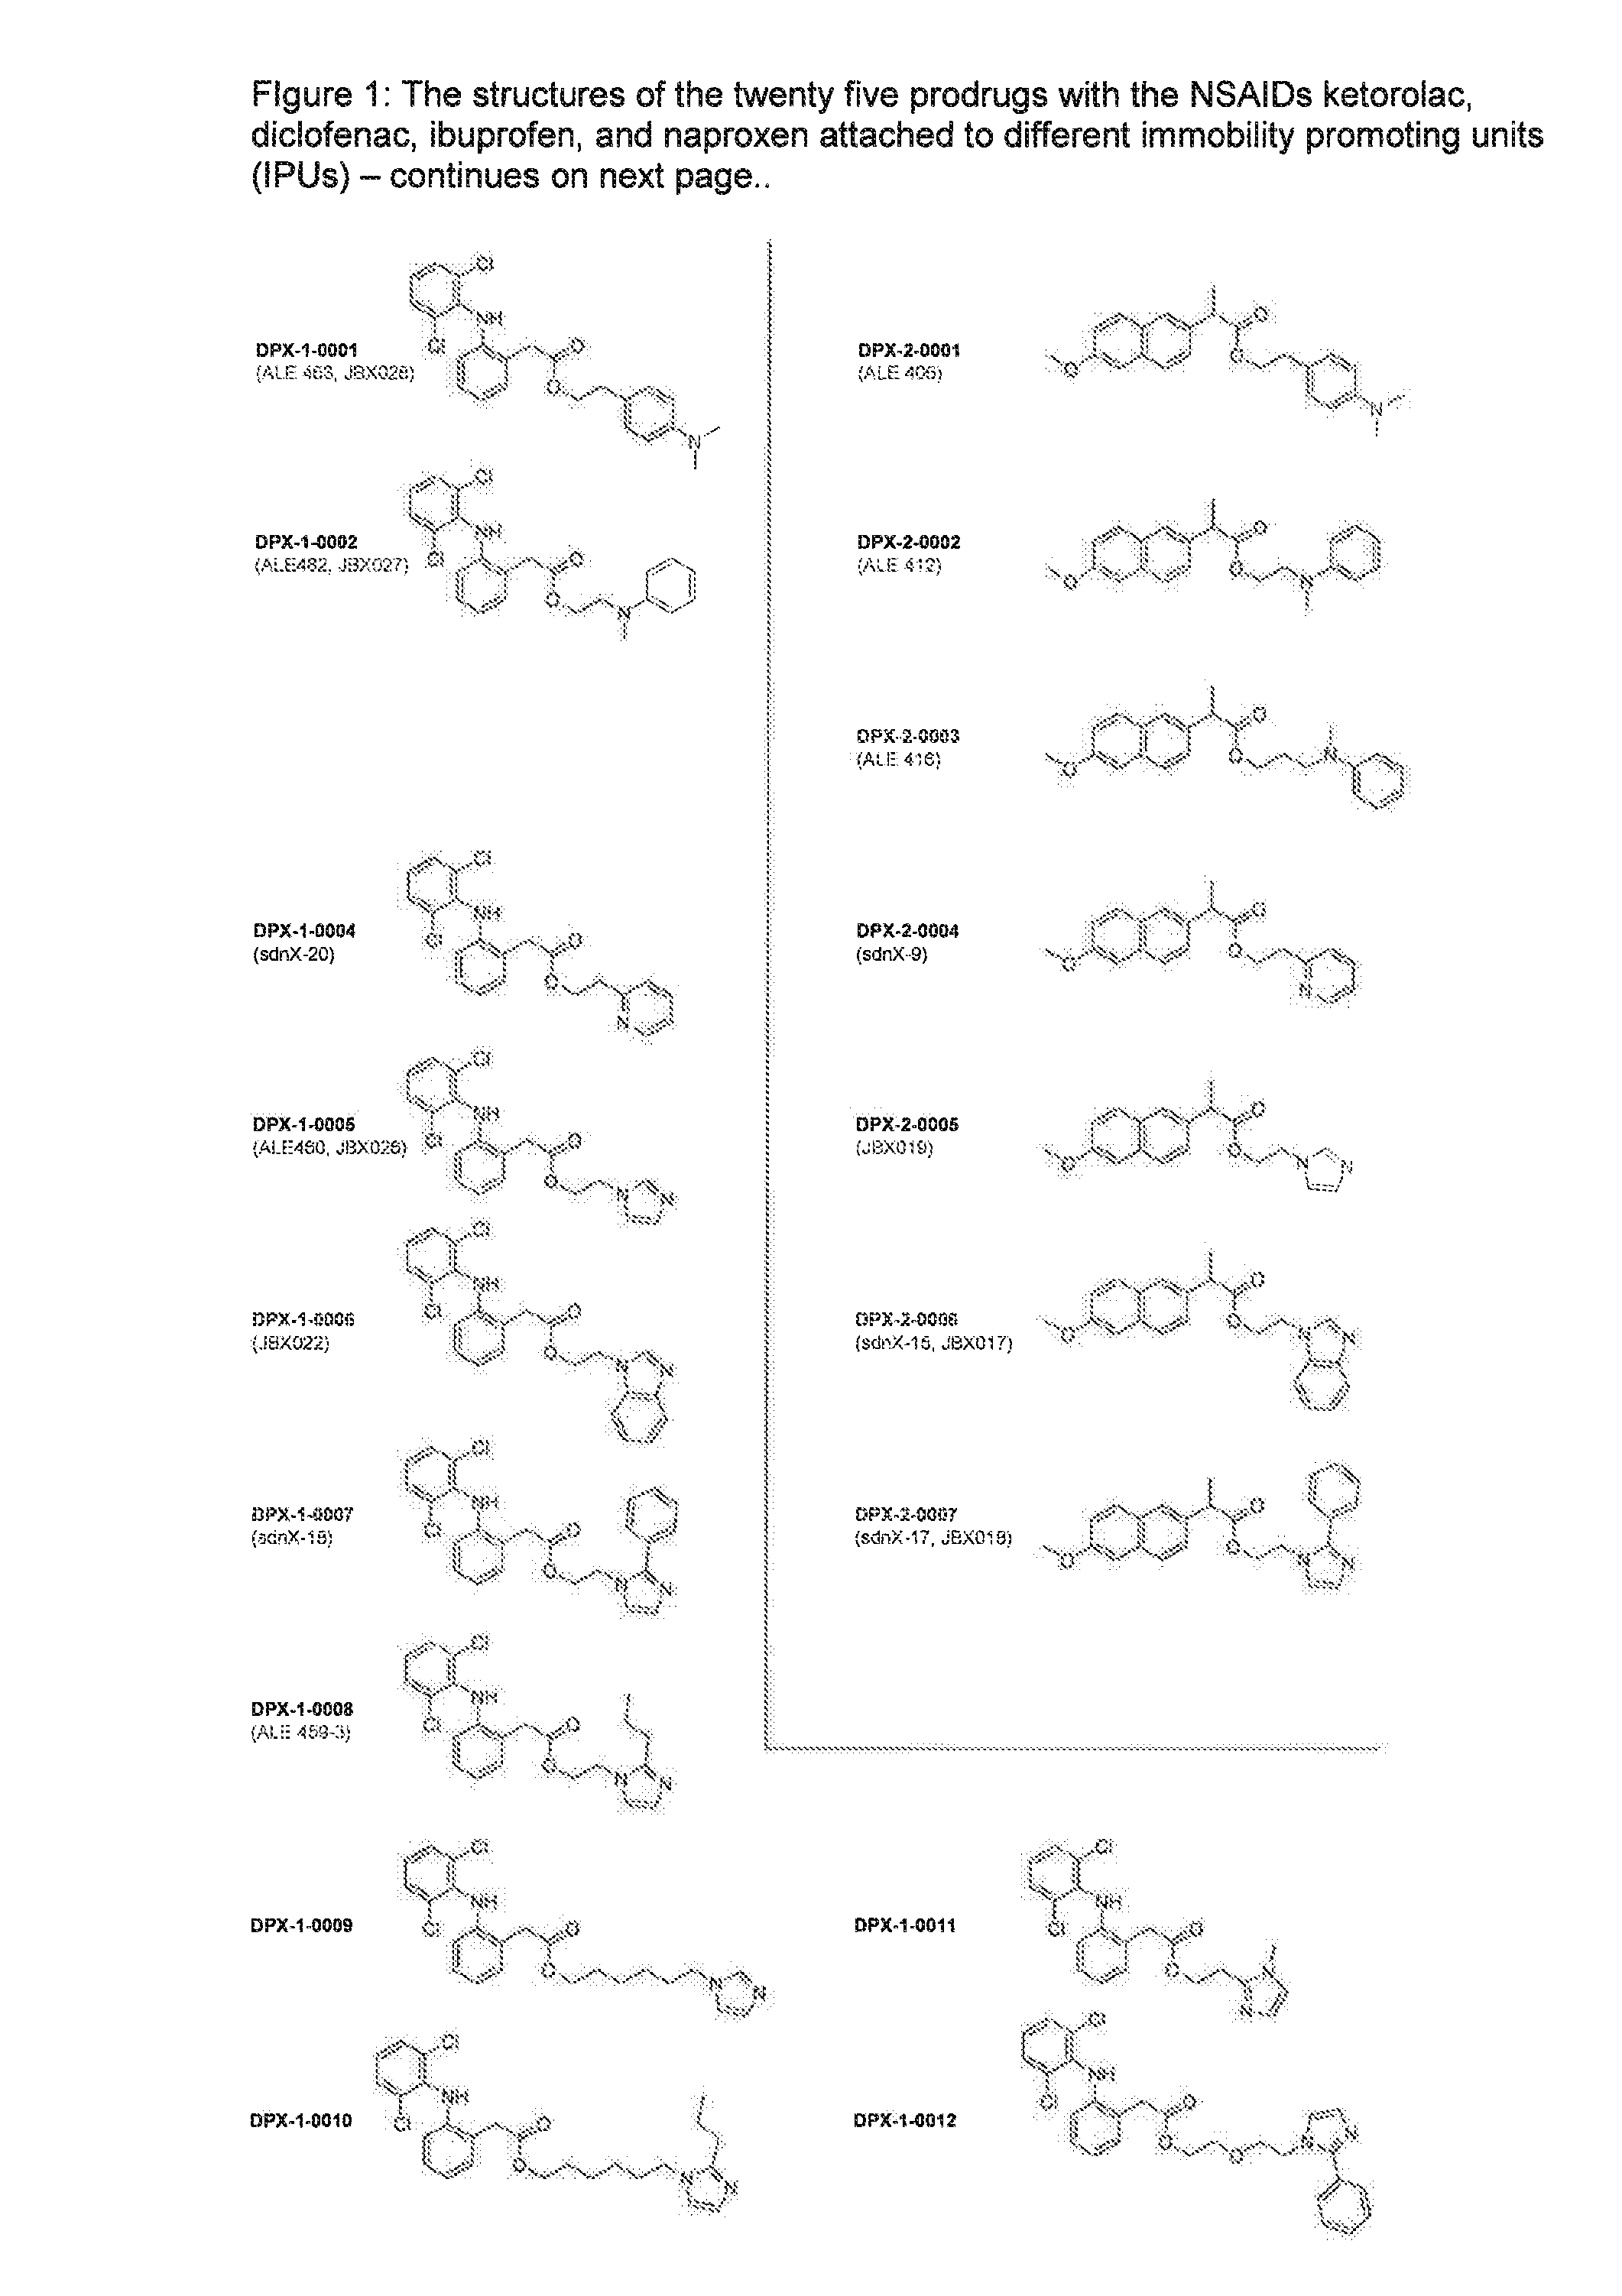 Prodrugs of non-steroid Anti-inflammatory agents (nsaids)